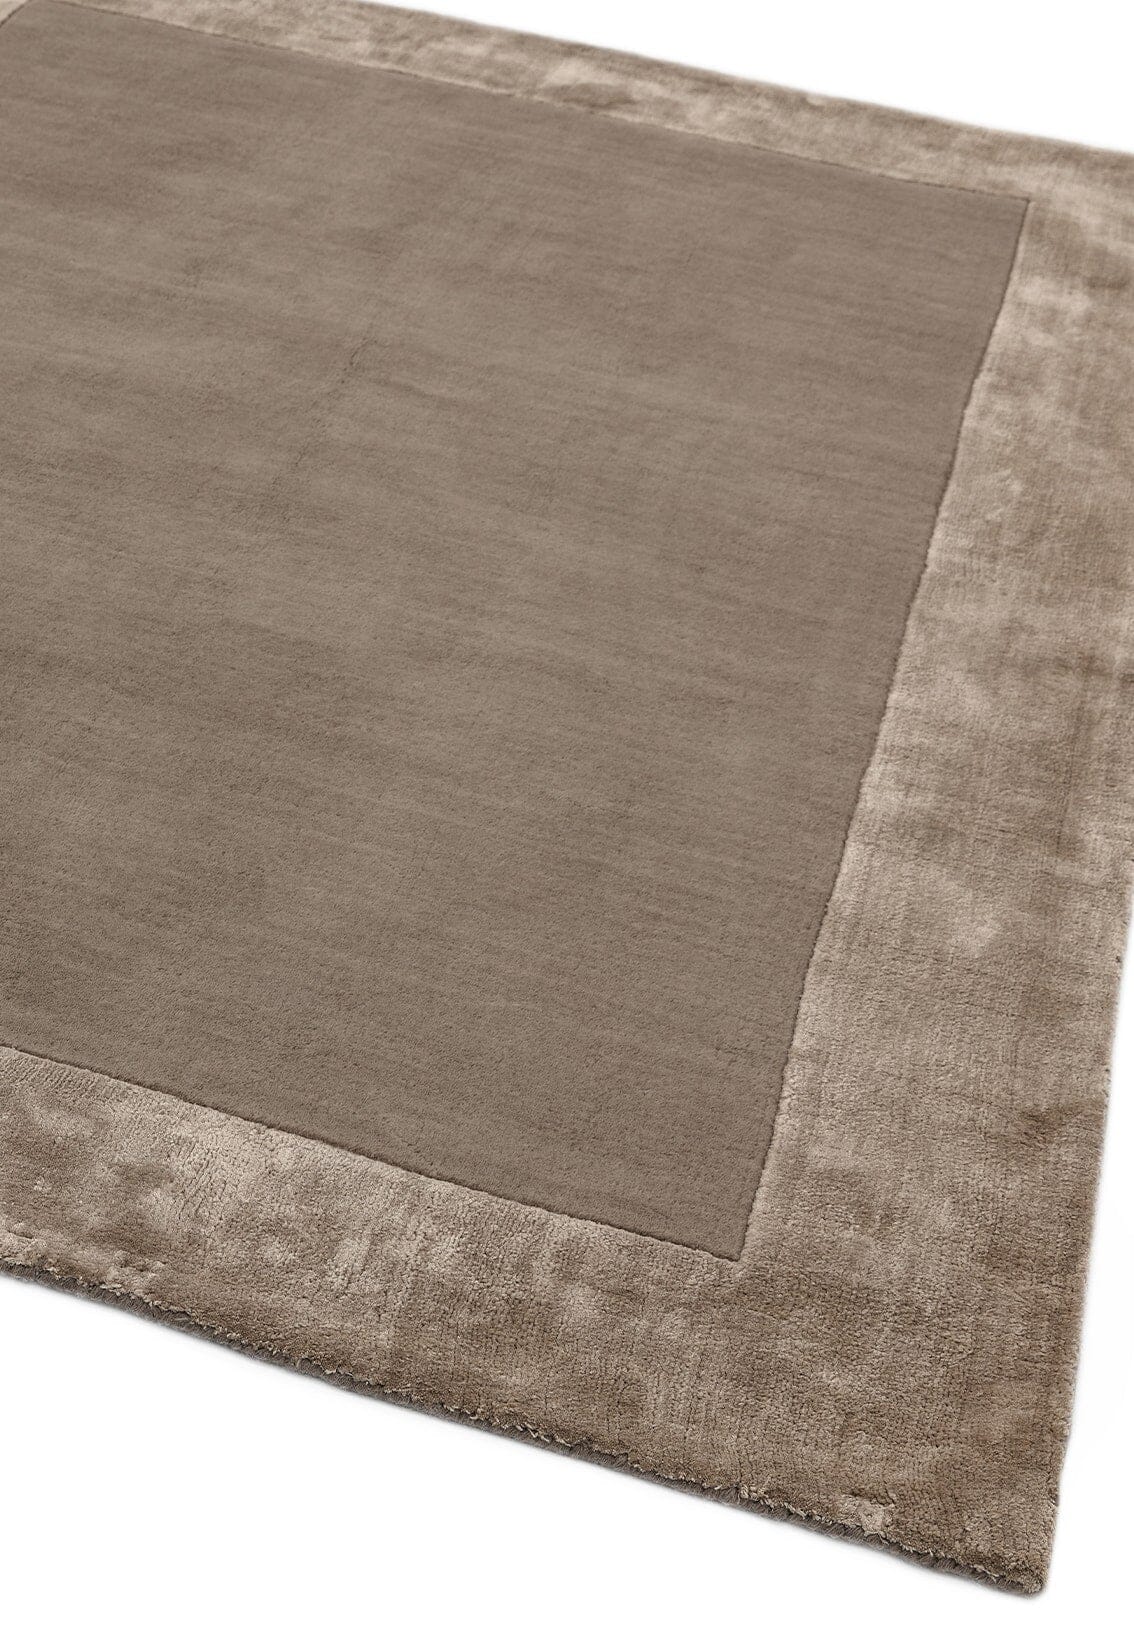  Asiatic Carpets-Asiatic Carpets Ascot Hand Woven Rug Taupe - 200 x 290cm-Beige, Natural 077 